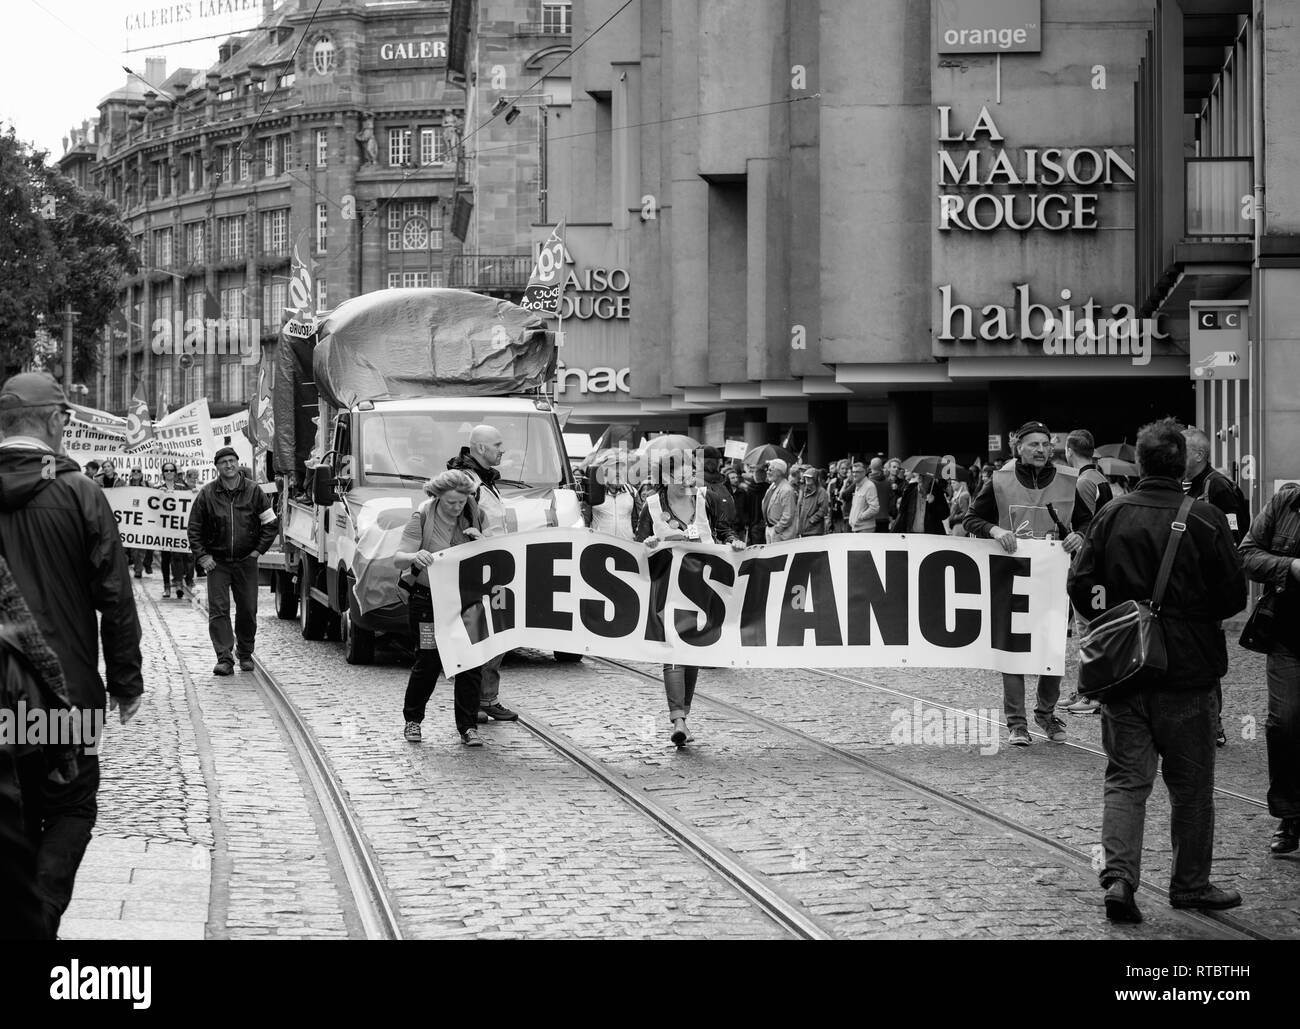 STRASBOURG, FRANCE - SEPT 12, 2017: Demonstrators with Resistance banner at political march during a French Nationwide day of protest against the labor reform proposed by Emmanuel Macron Government Stock Photo